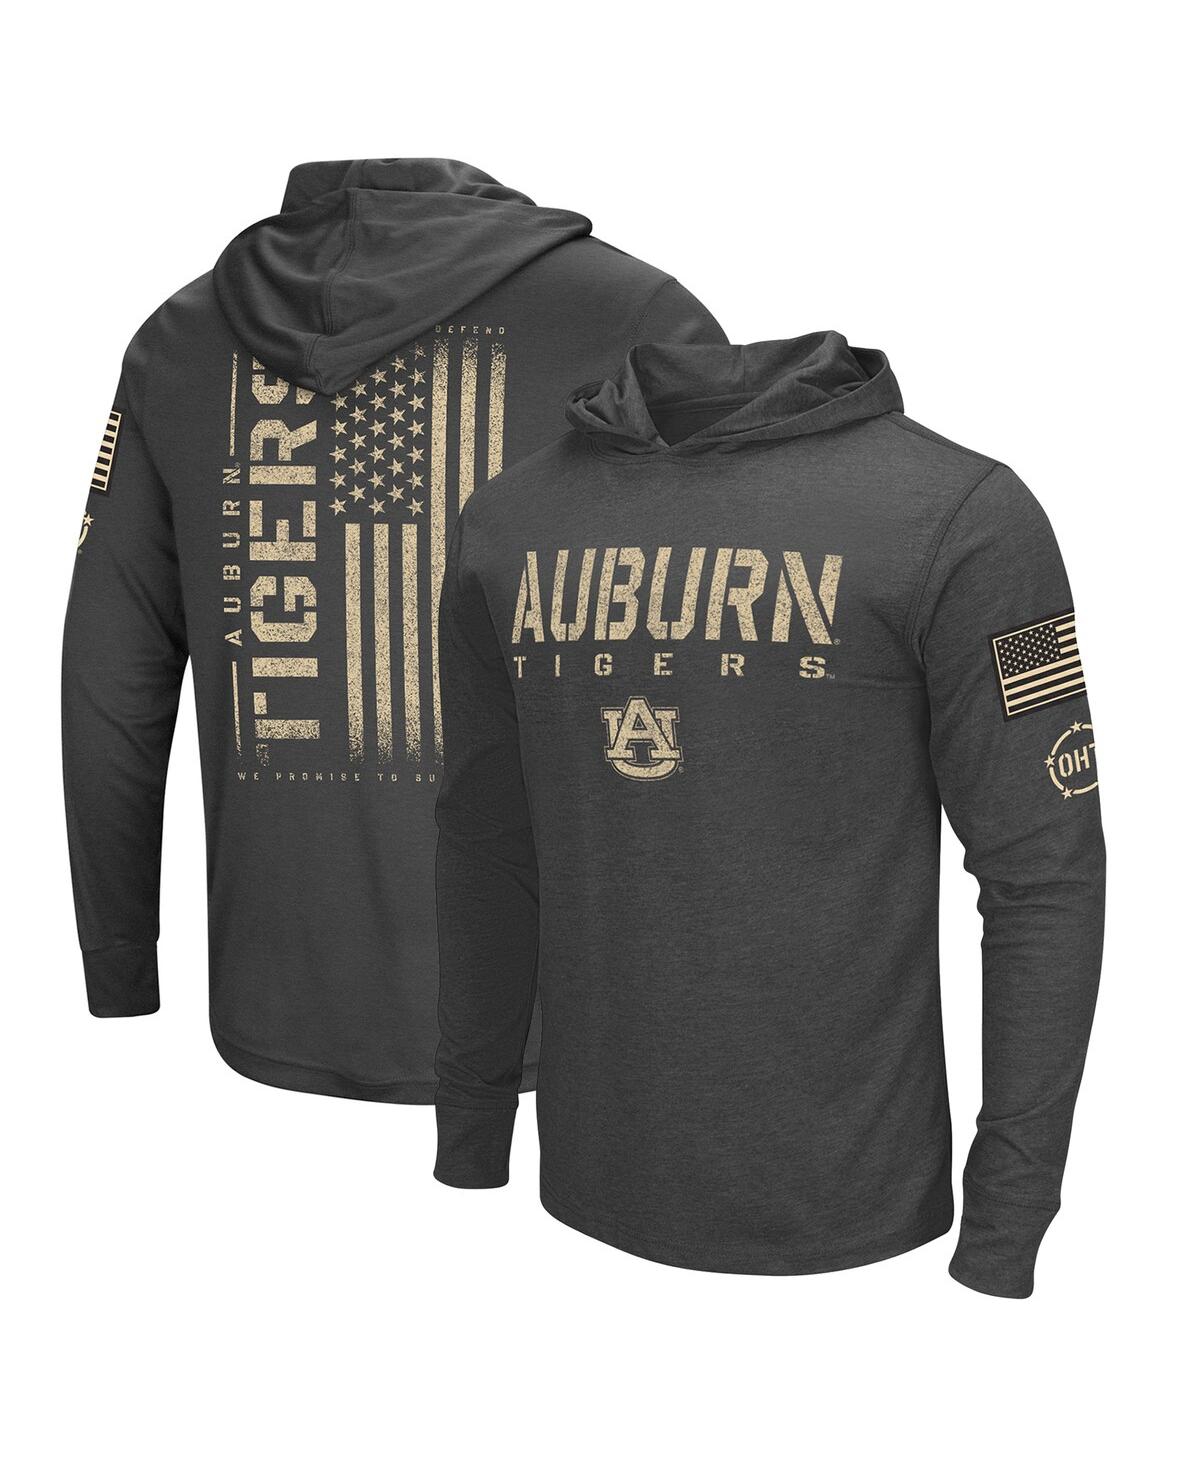 Men's Colosseum Charcoal Distressed Auburn Tigers Team Oht Military-Inspired Appreciation Hoodie Long Sleeve T-shirt - Charcoal